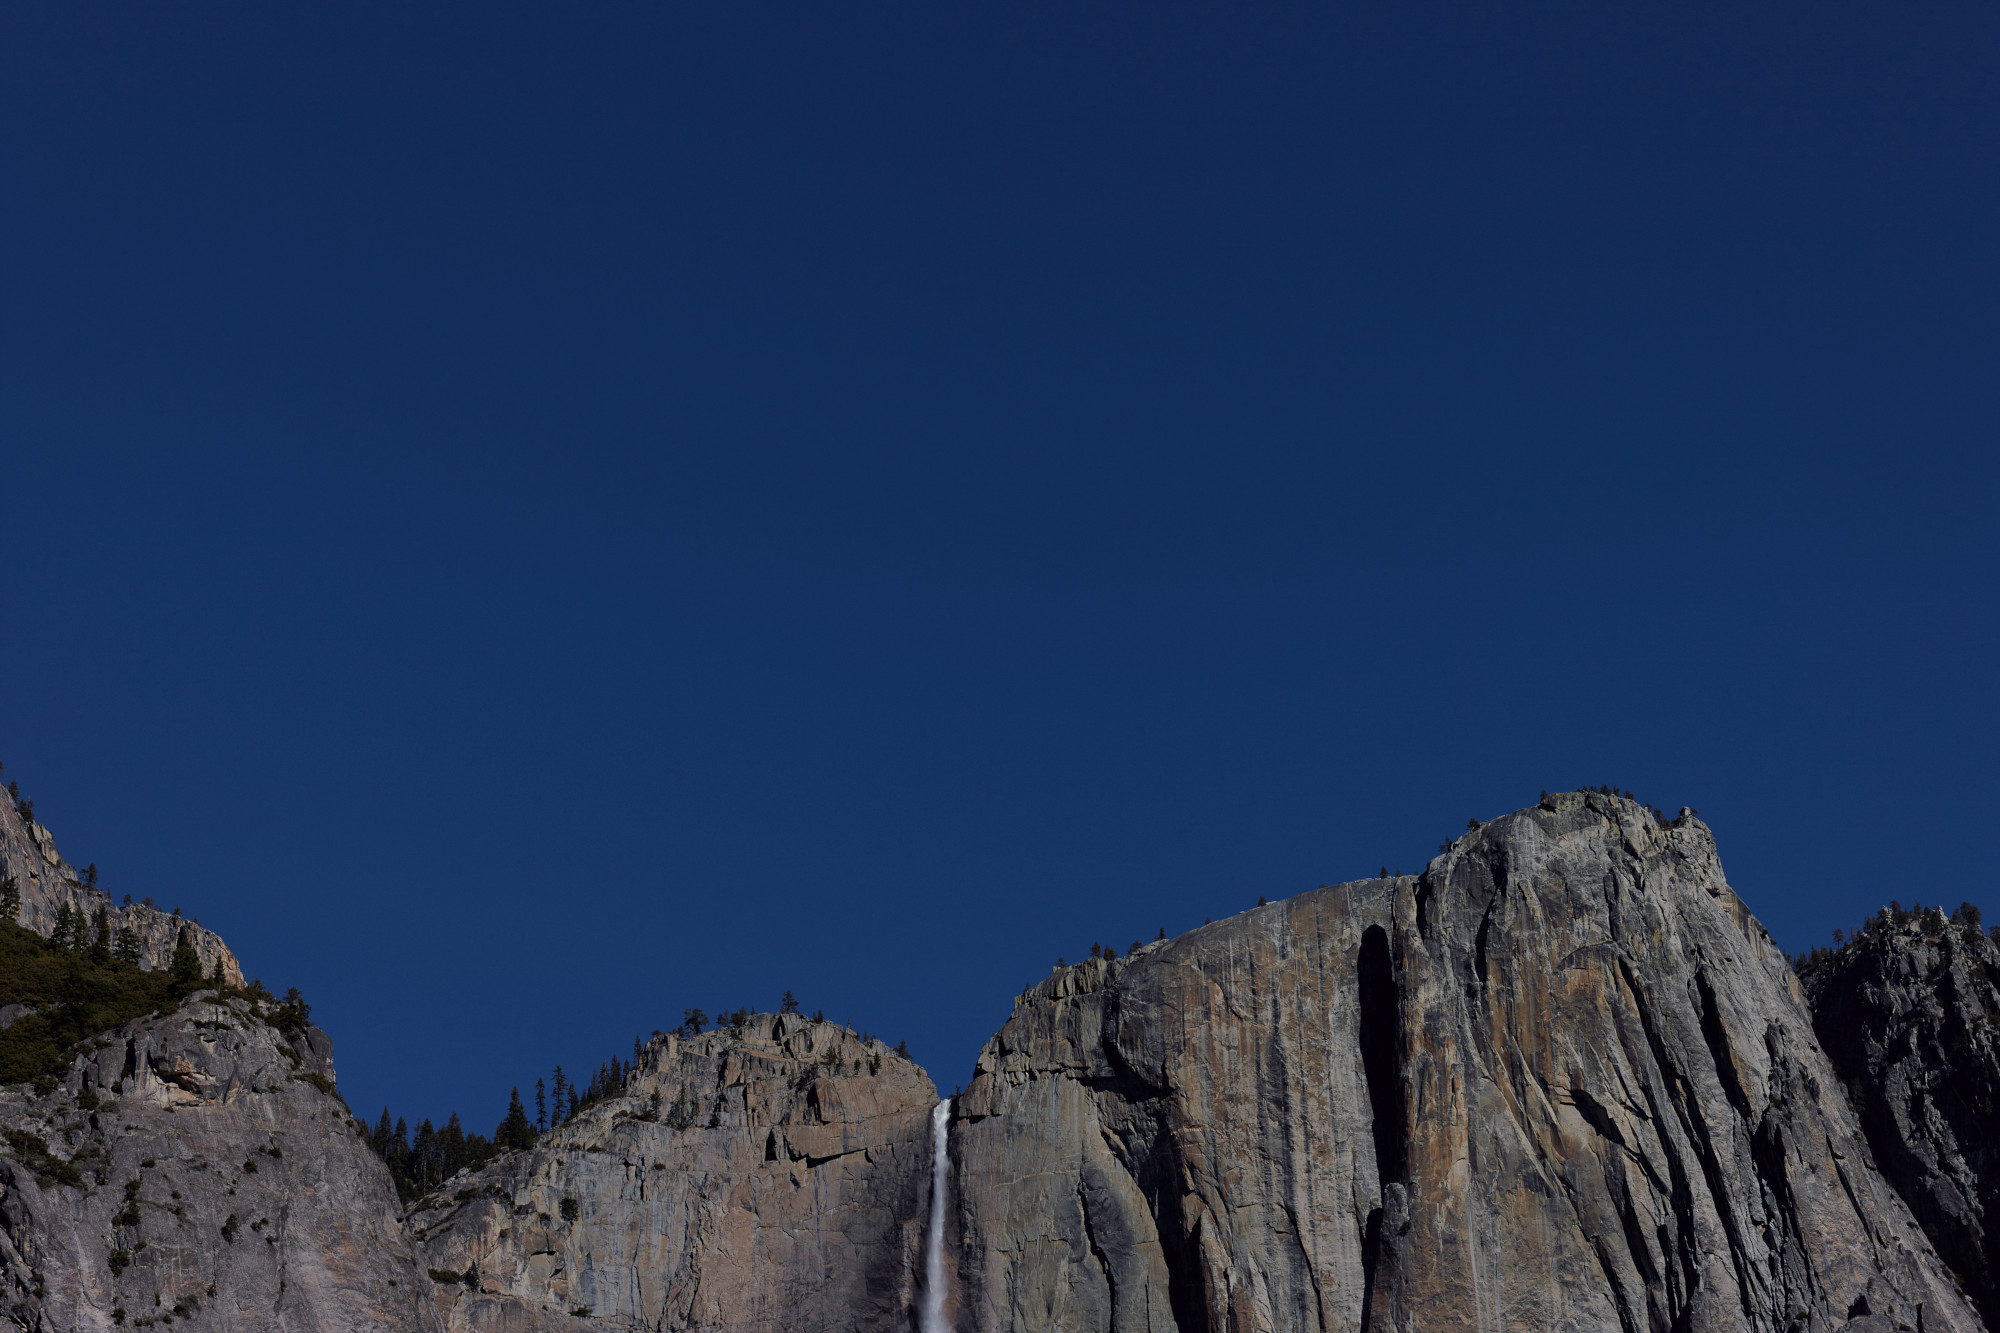 Cobalt Blue Sky, 2015. From Yosemite. Pigment print, 30 × 45 in. (76.2 × 114.3 cm). Courtesy the artist and Regen Projects, Los Angeles; Lehmann Maupin, New York/Hong Kong/Seoul/London; Thomas Dane Gallery, London and Naples; and Peder Lund, Oslo